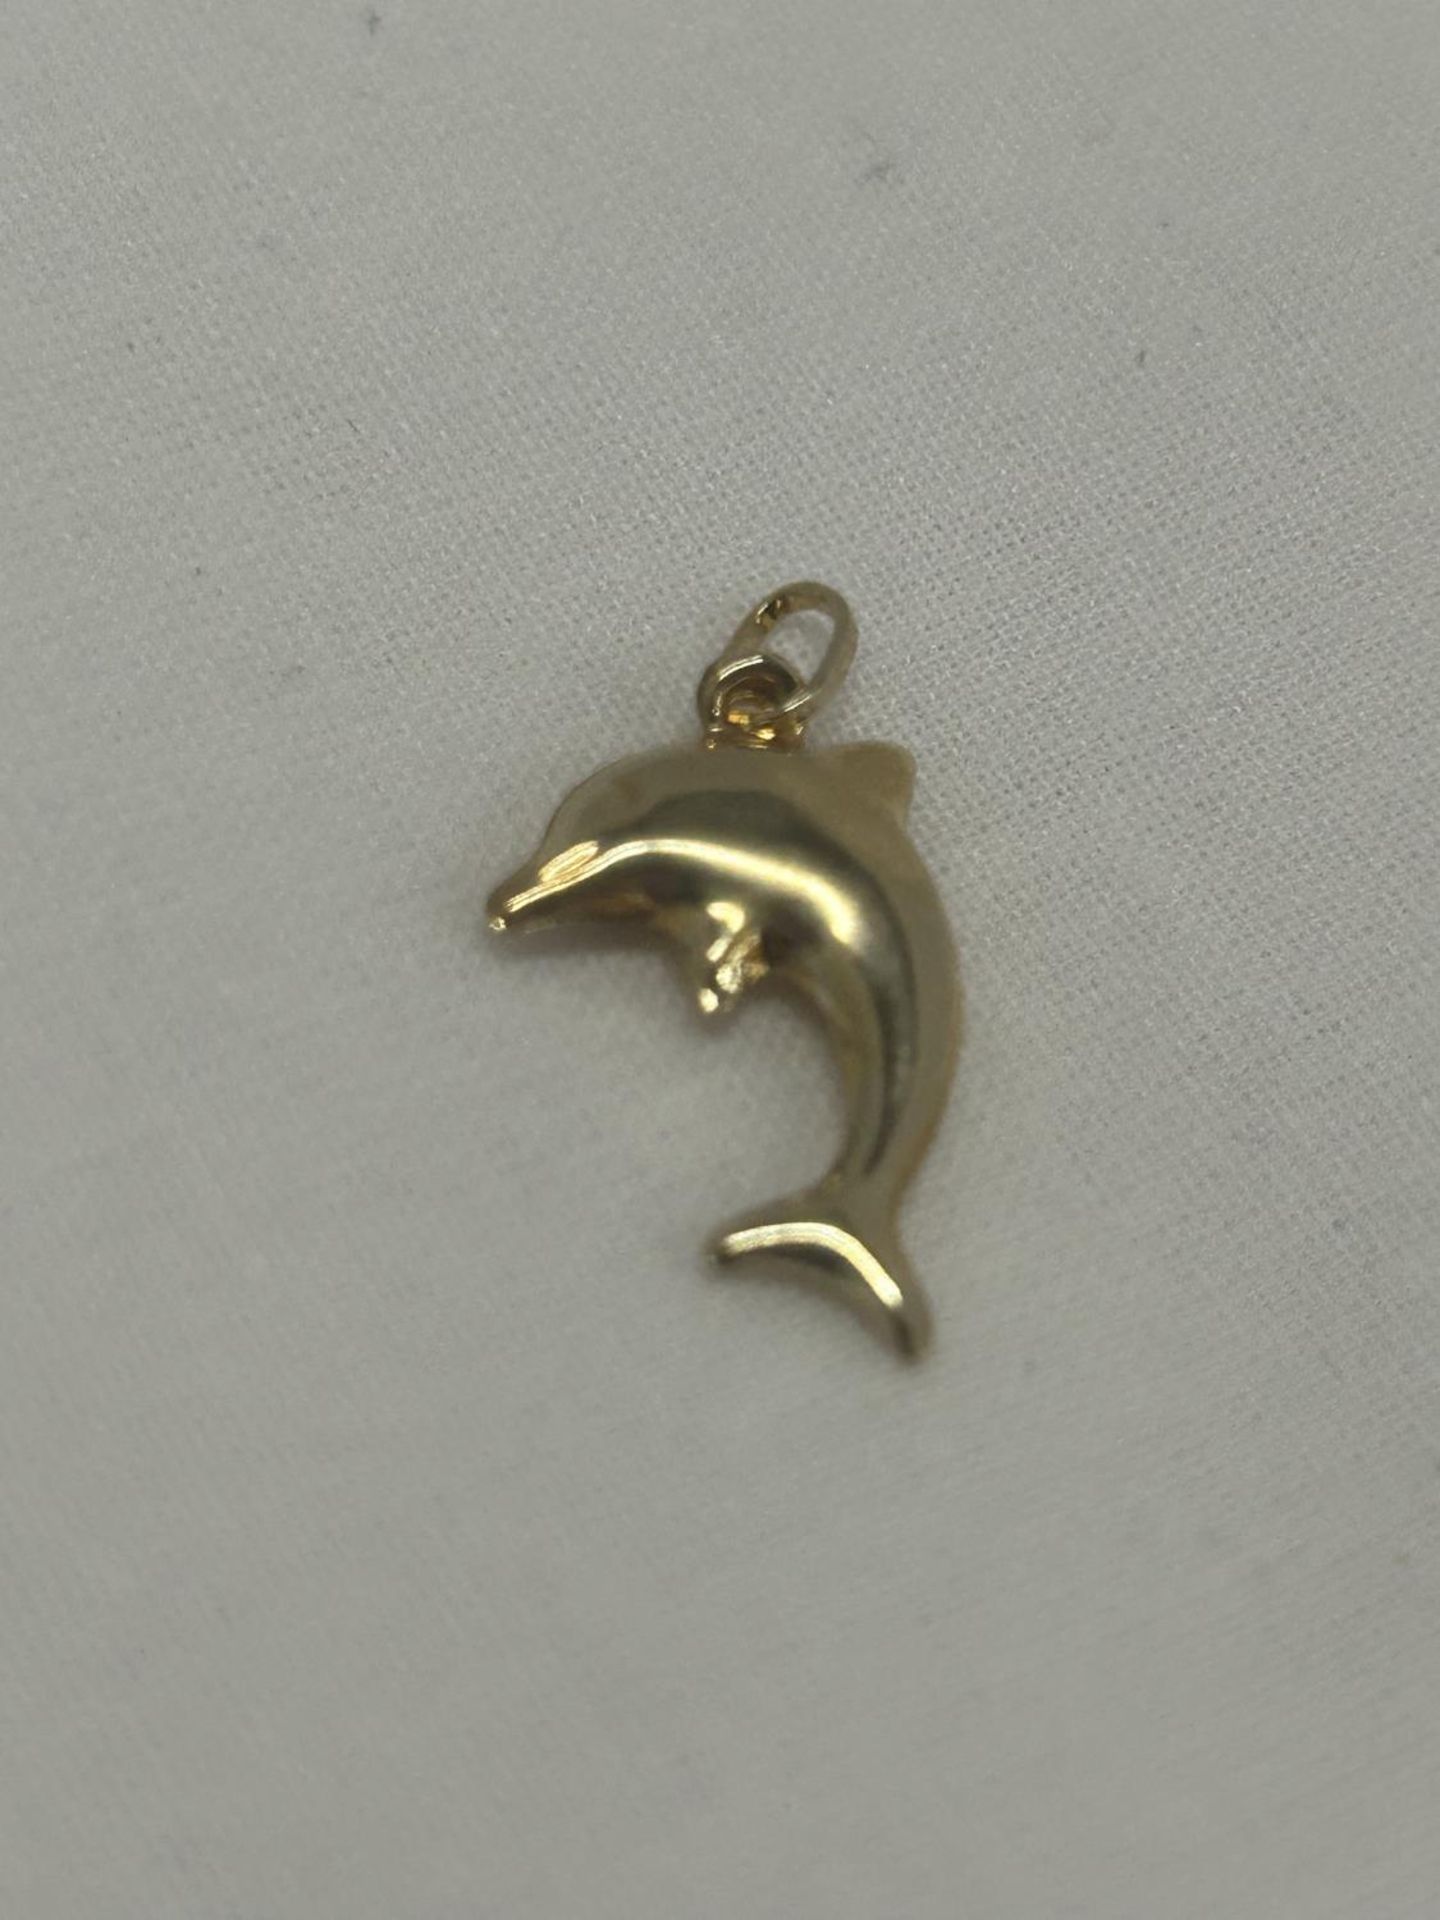 A 9CT YELLOW GOLD DOLPHIN CHARM - Image 2 of 3